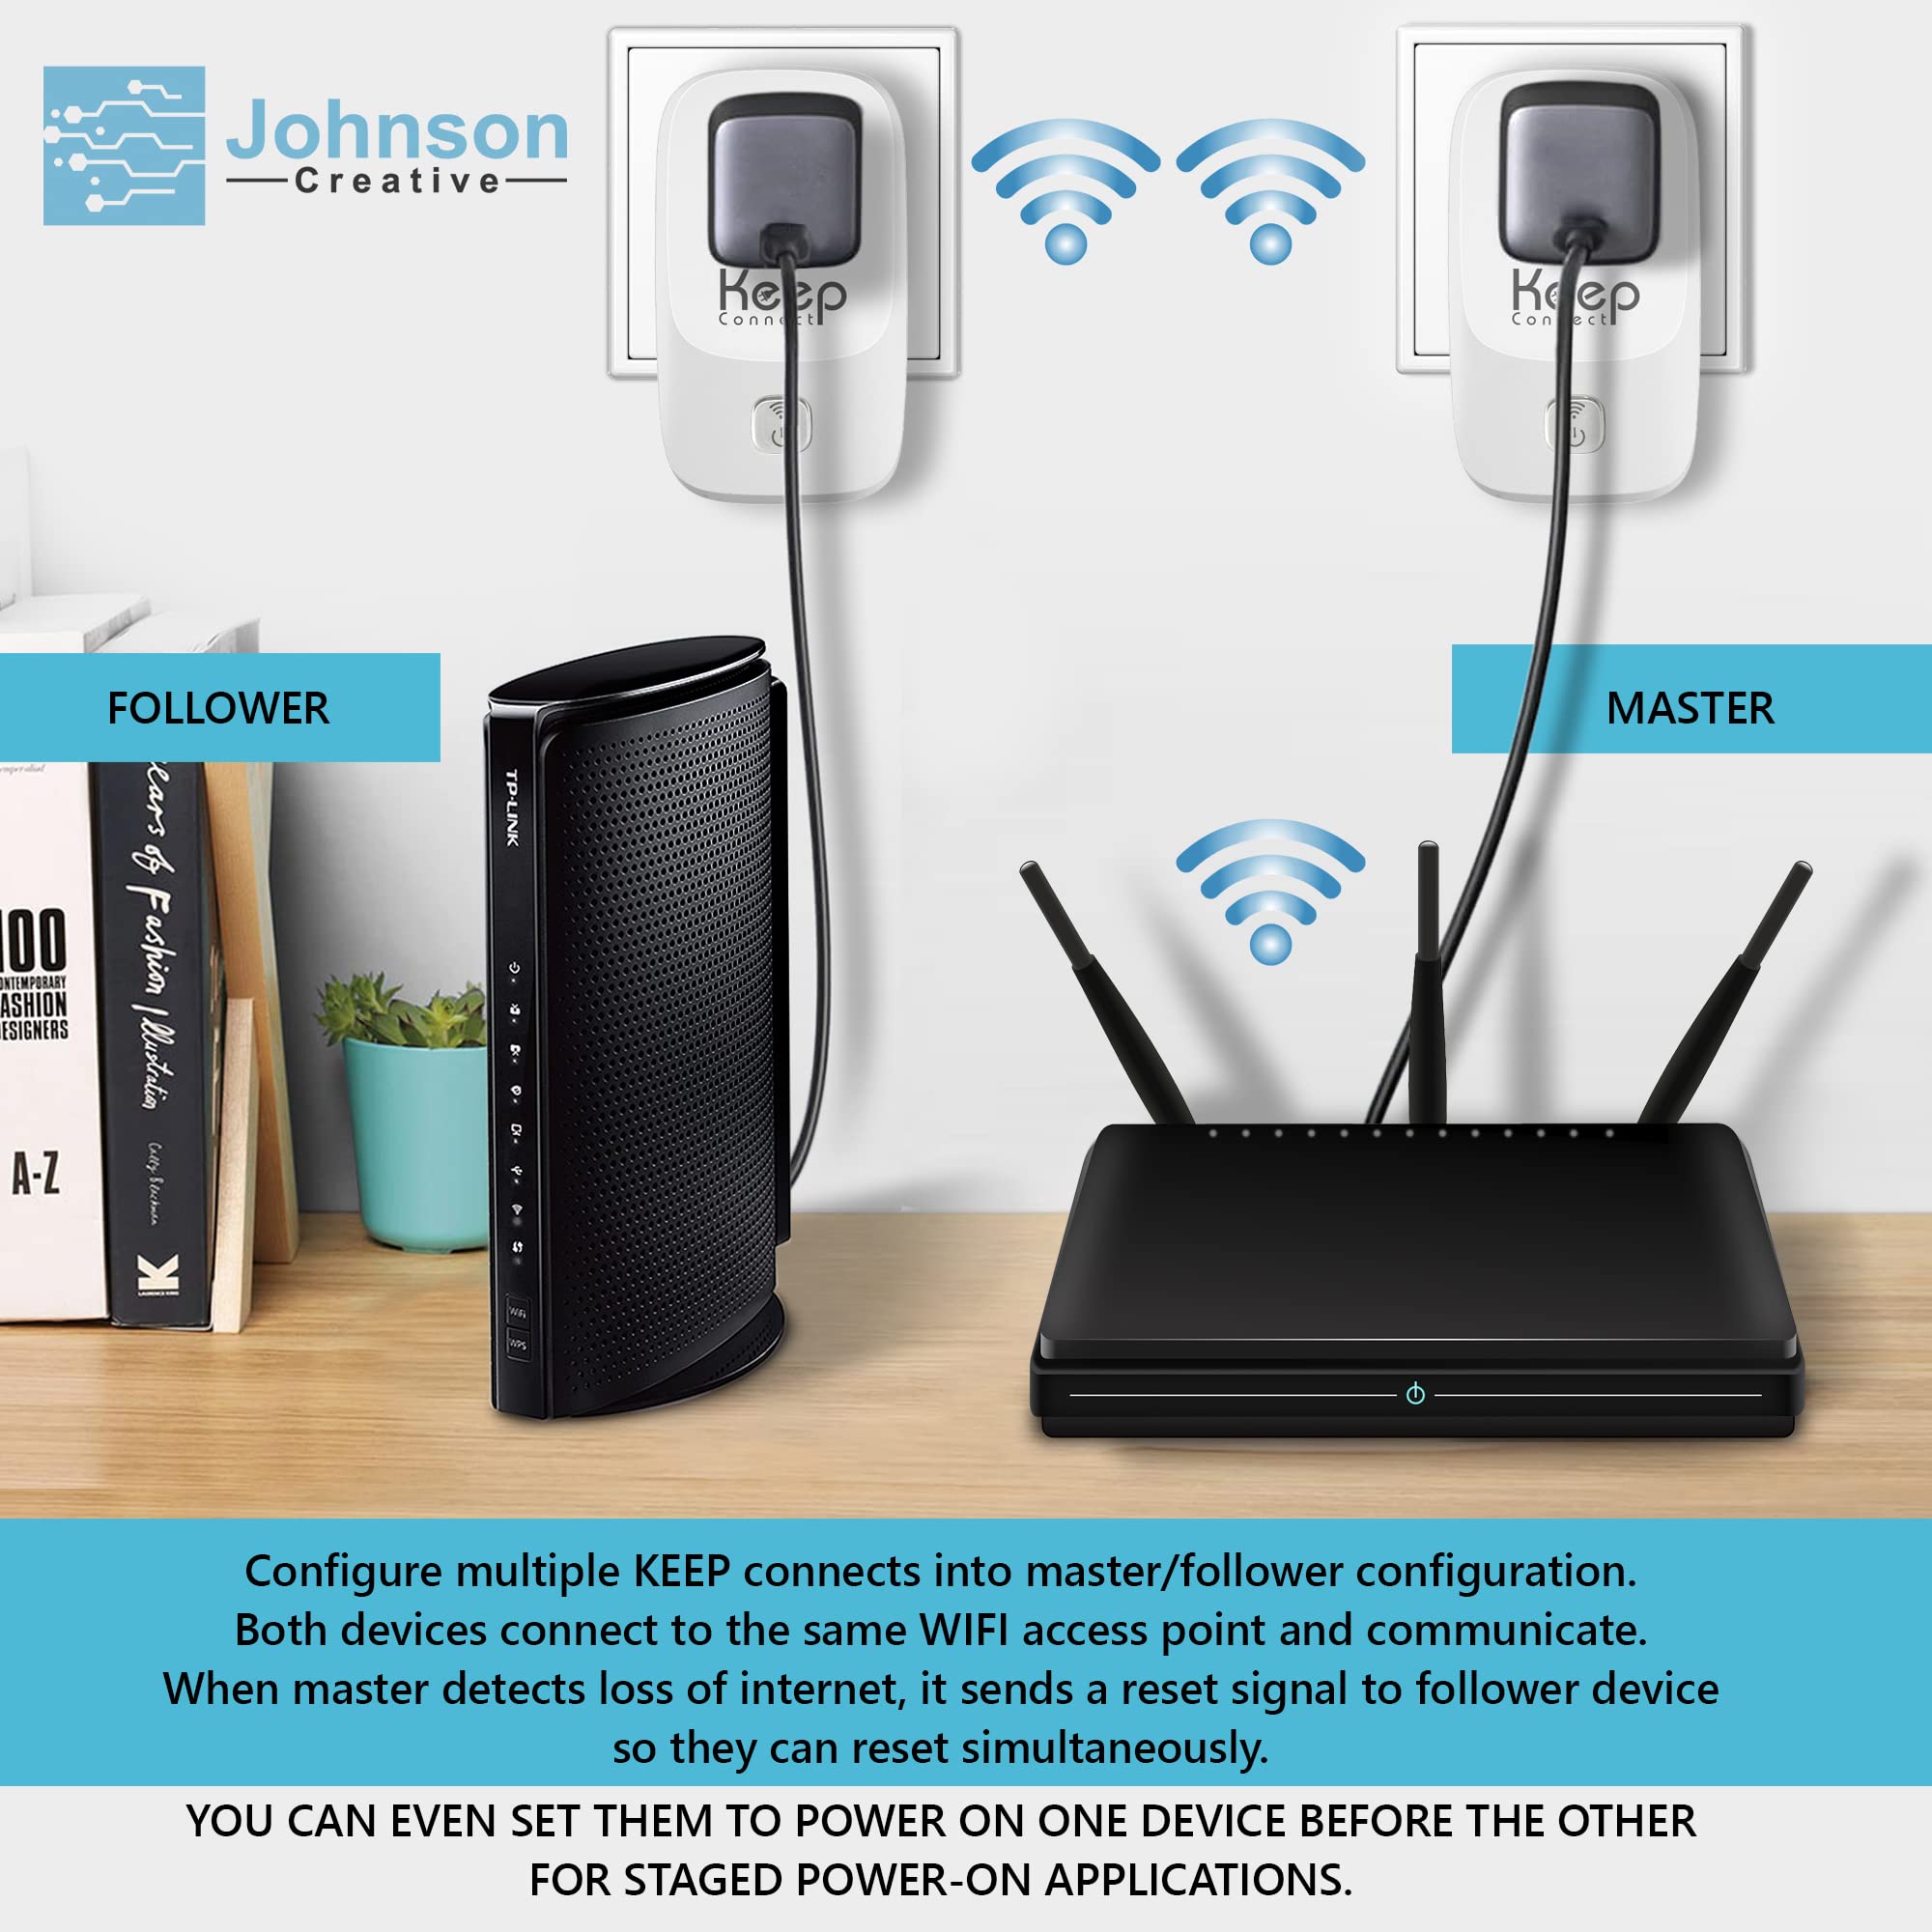 Ensure that your device is connected to a stable internet connection.
If using Wi-Fi, try switching to a different network or resetting the router.